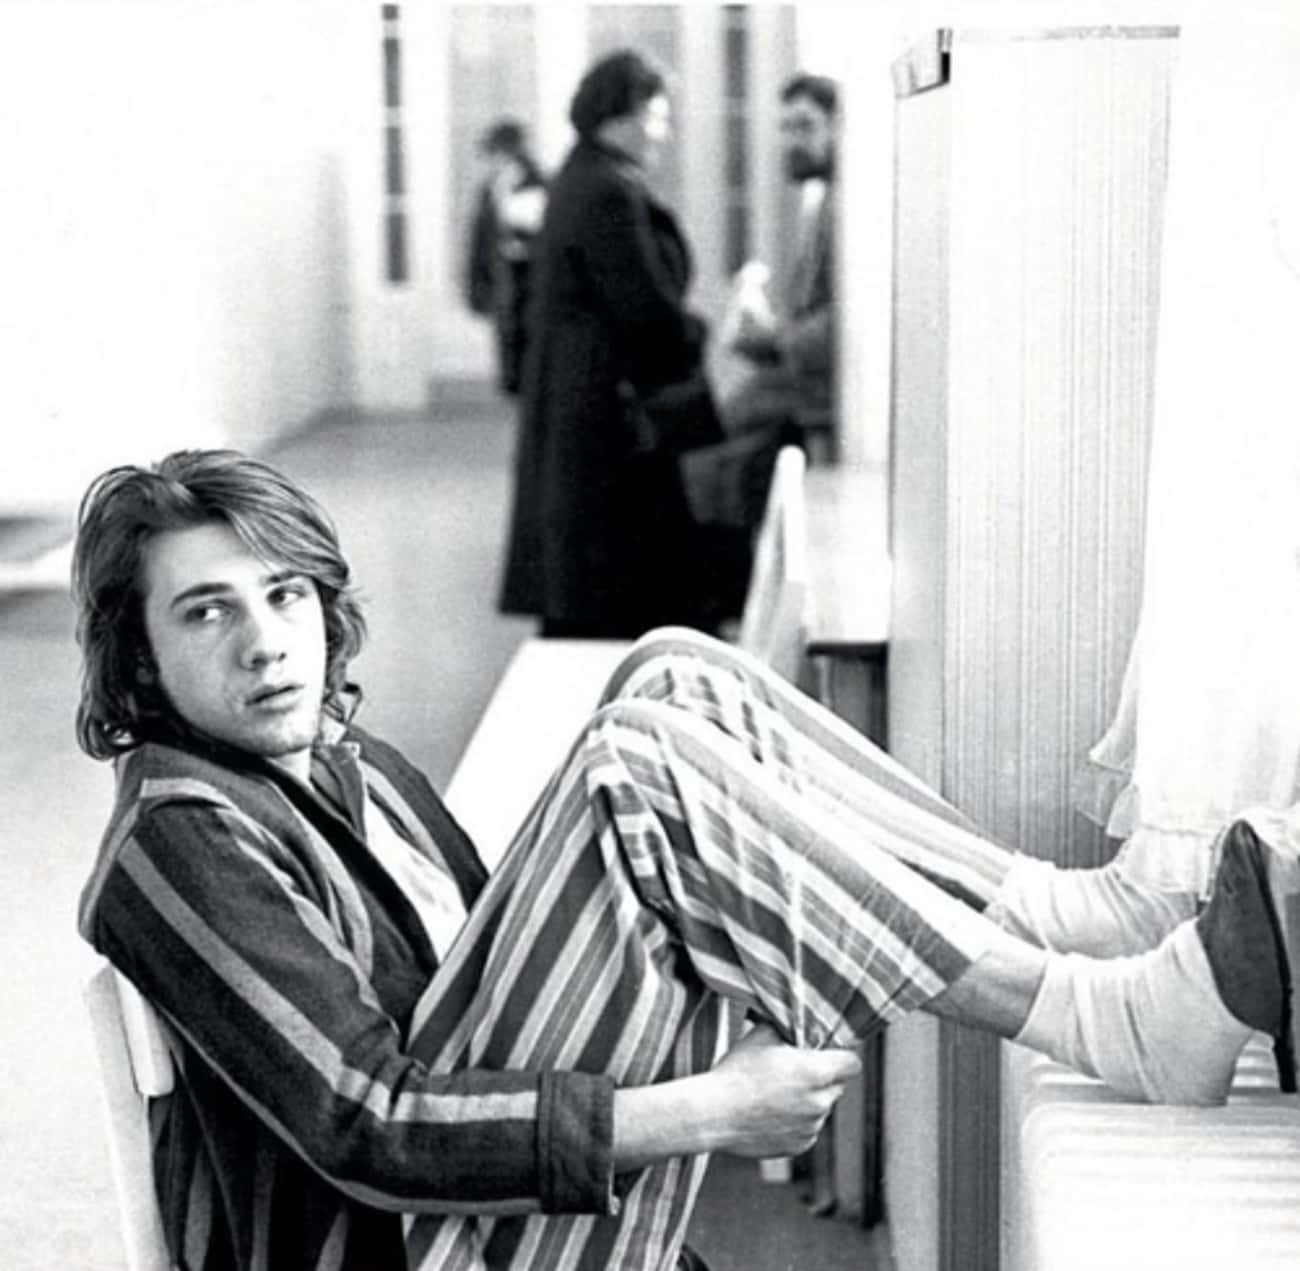 Young Christoph Waltz in Striped Shirts and Pants